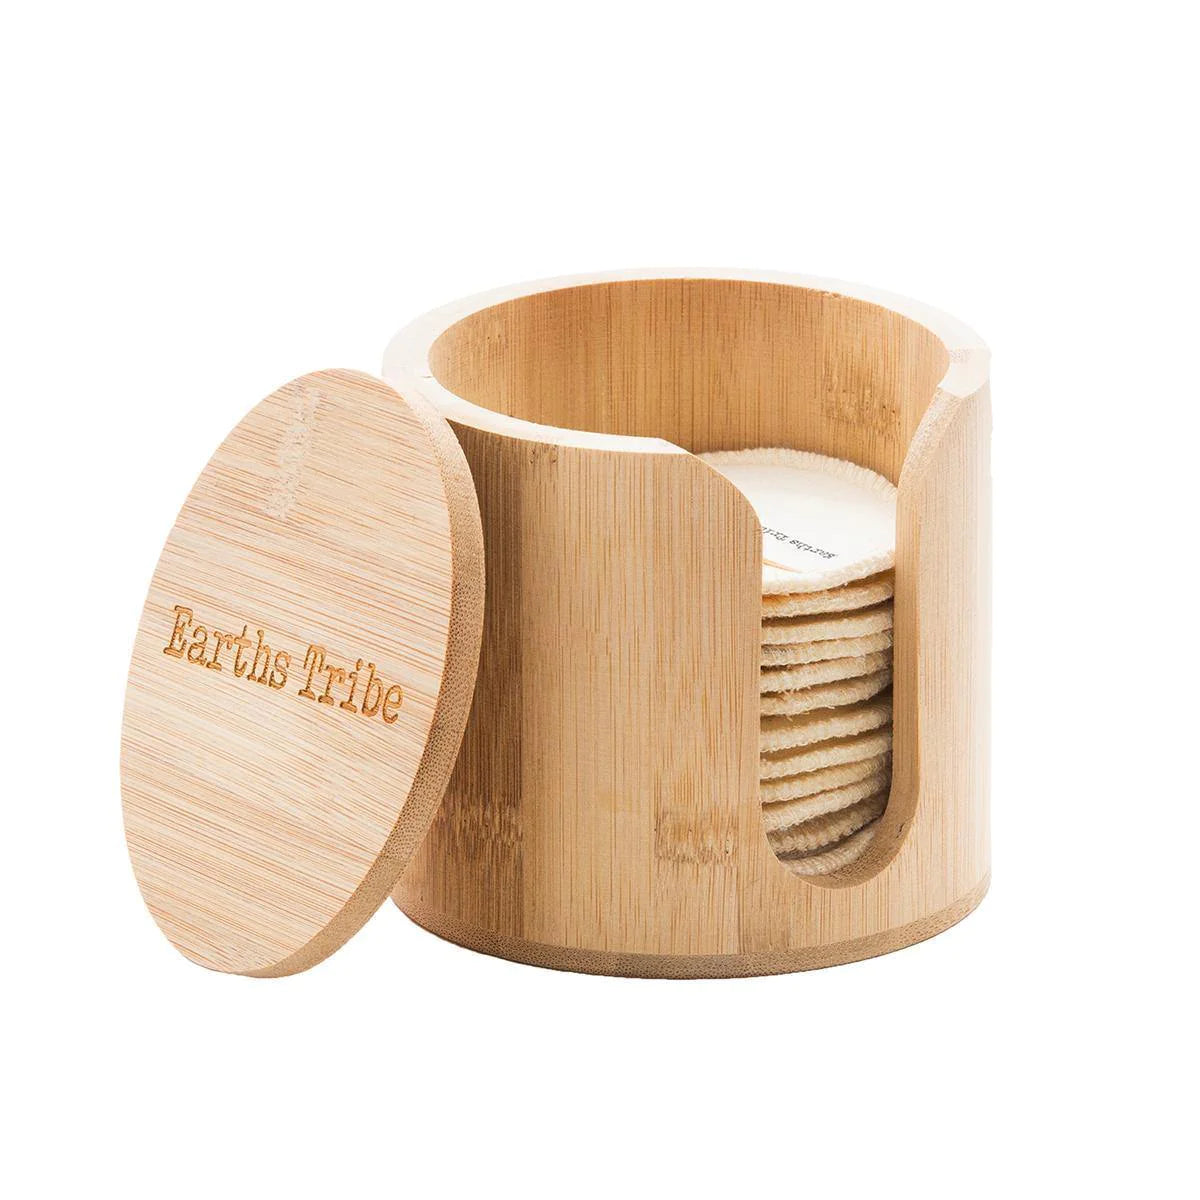 "Transform your beauty routine with our chic bamboo makeup round holder. Perfect for tidy organization."